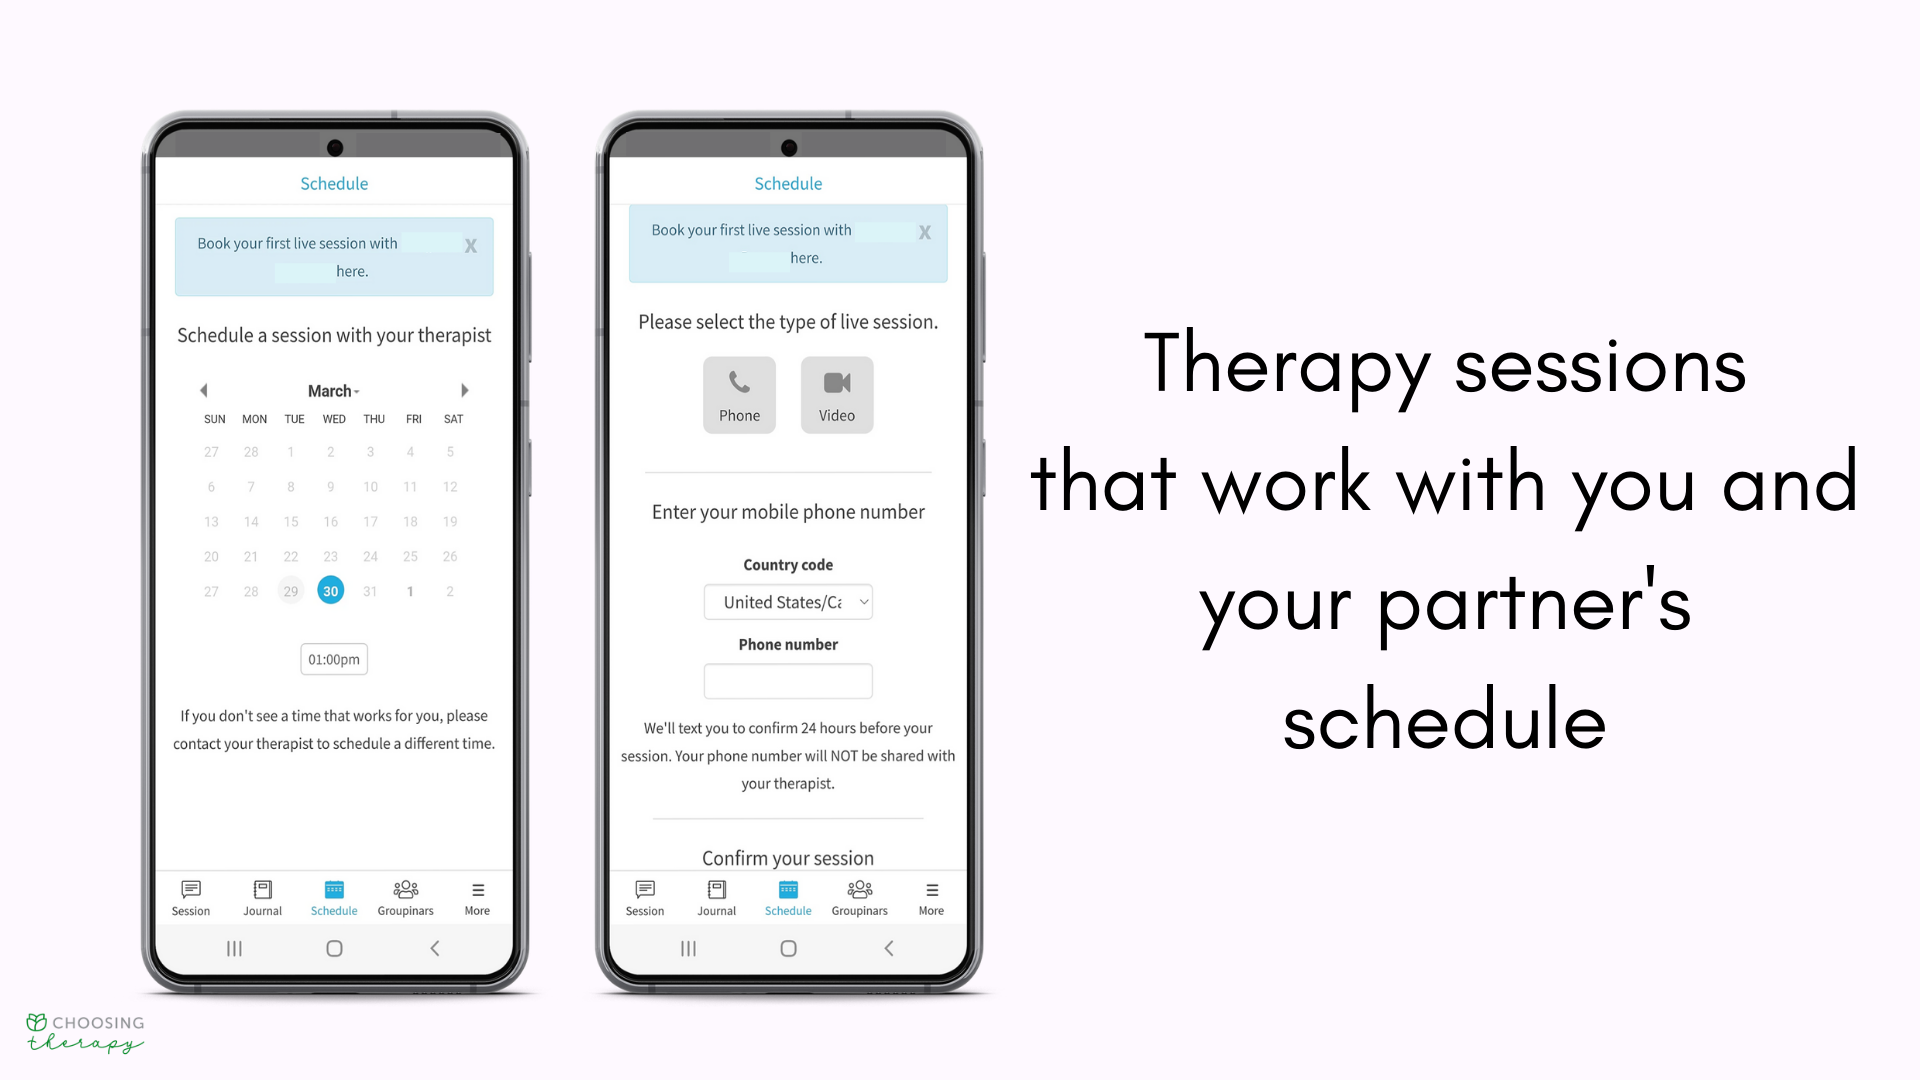 ReGain Couples Counseling Review 2022 - Image of how to schedule a session with your therapist in ReGain app